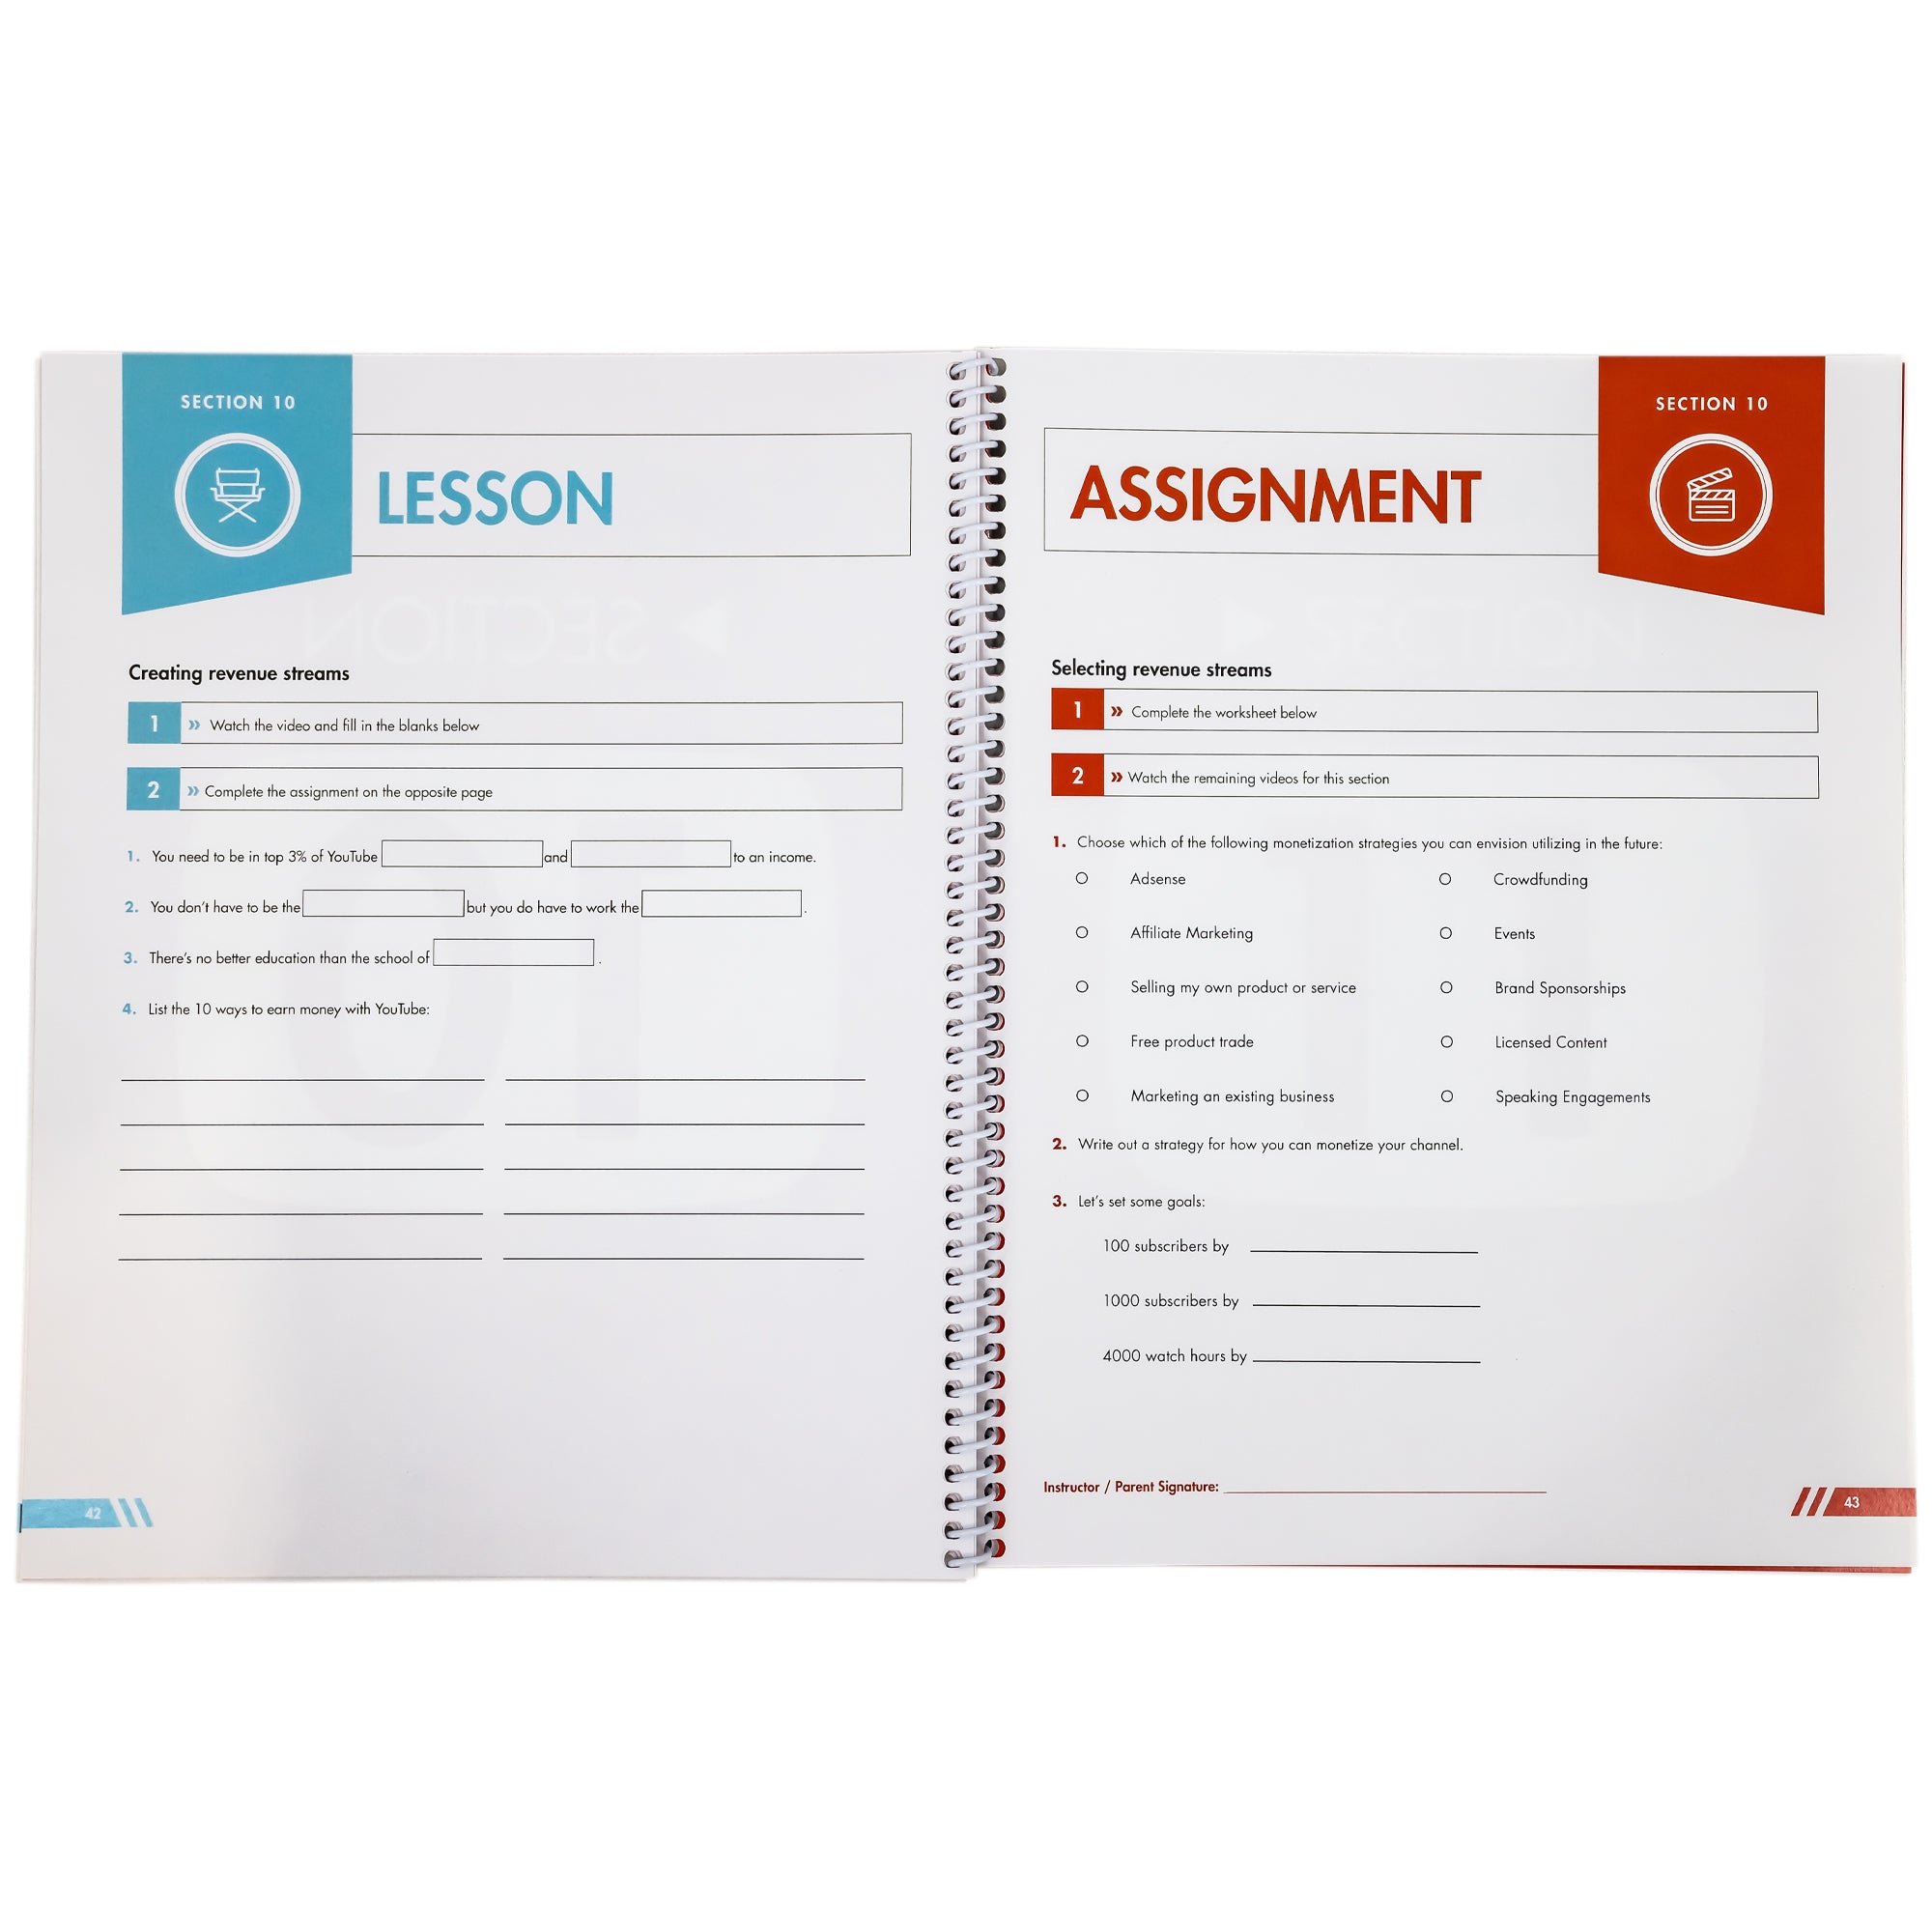 The spiral bound YouTube 4 Teens workbook is open to show the “lesson" on the left  page with a turquoise icon with a white directors chair. On the right page is the “assignment" with a red icon with a white clapperboard. Both pages instruct on how to create revenue streams.